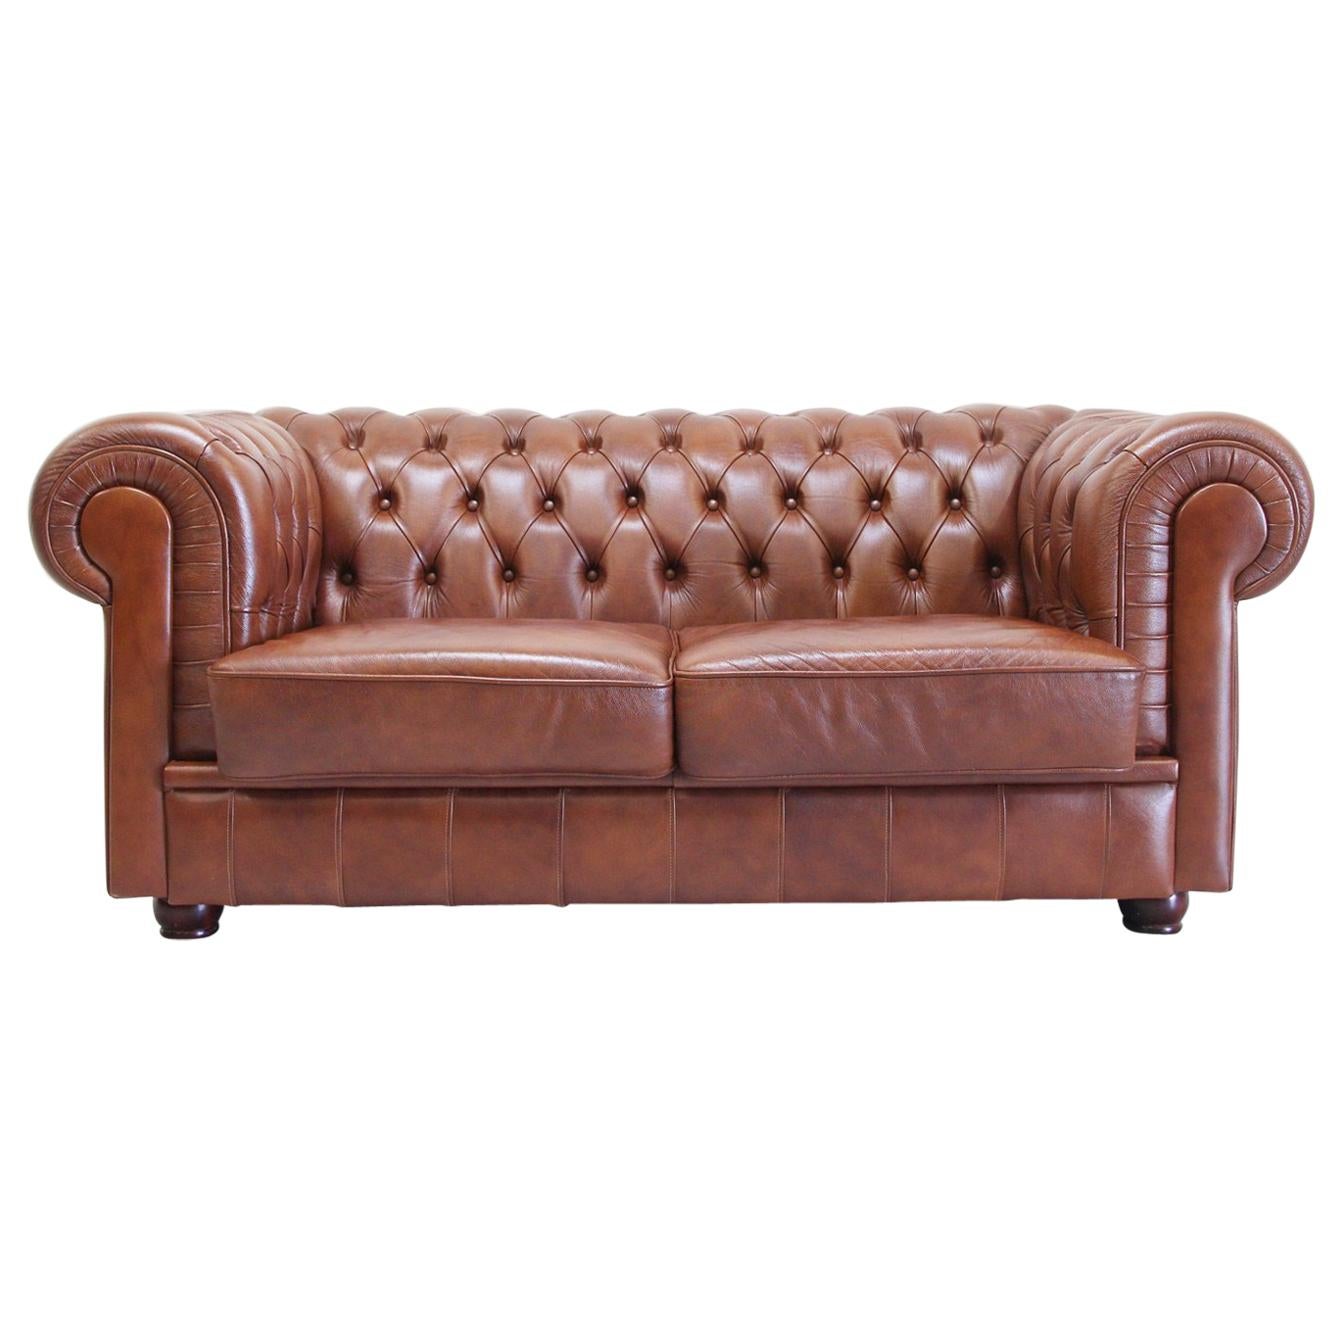 Chesterfield Sofa Leather Antique Chippendale Vintage Couch English For Sale